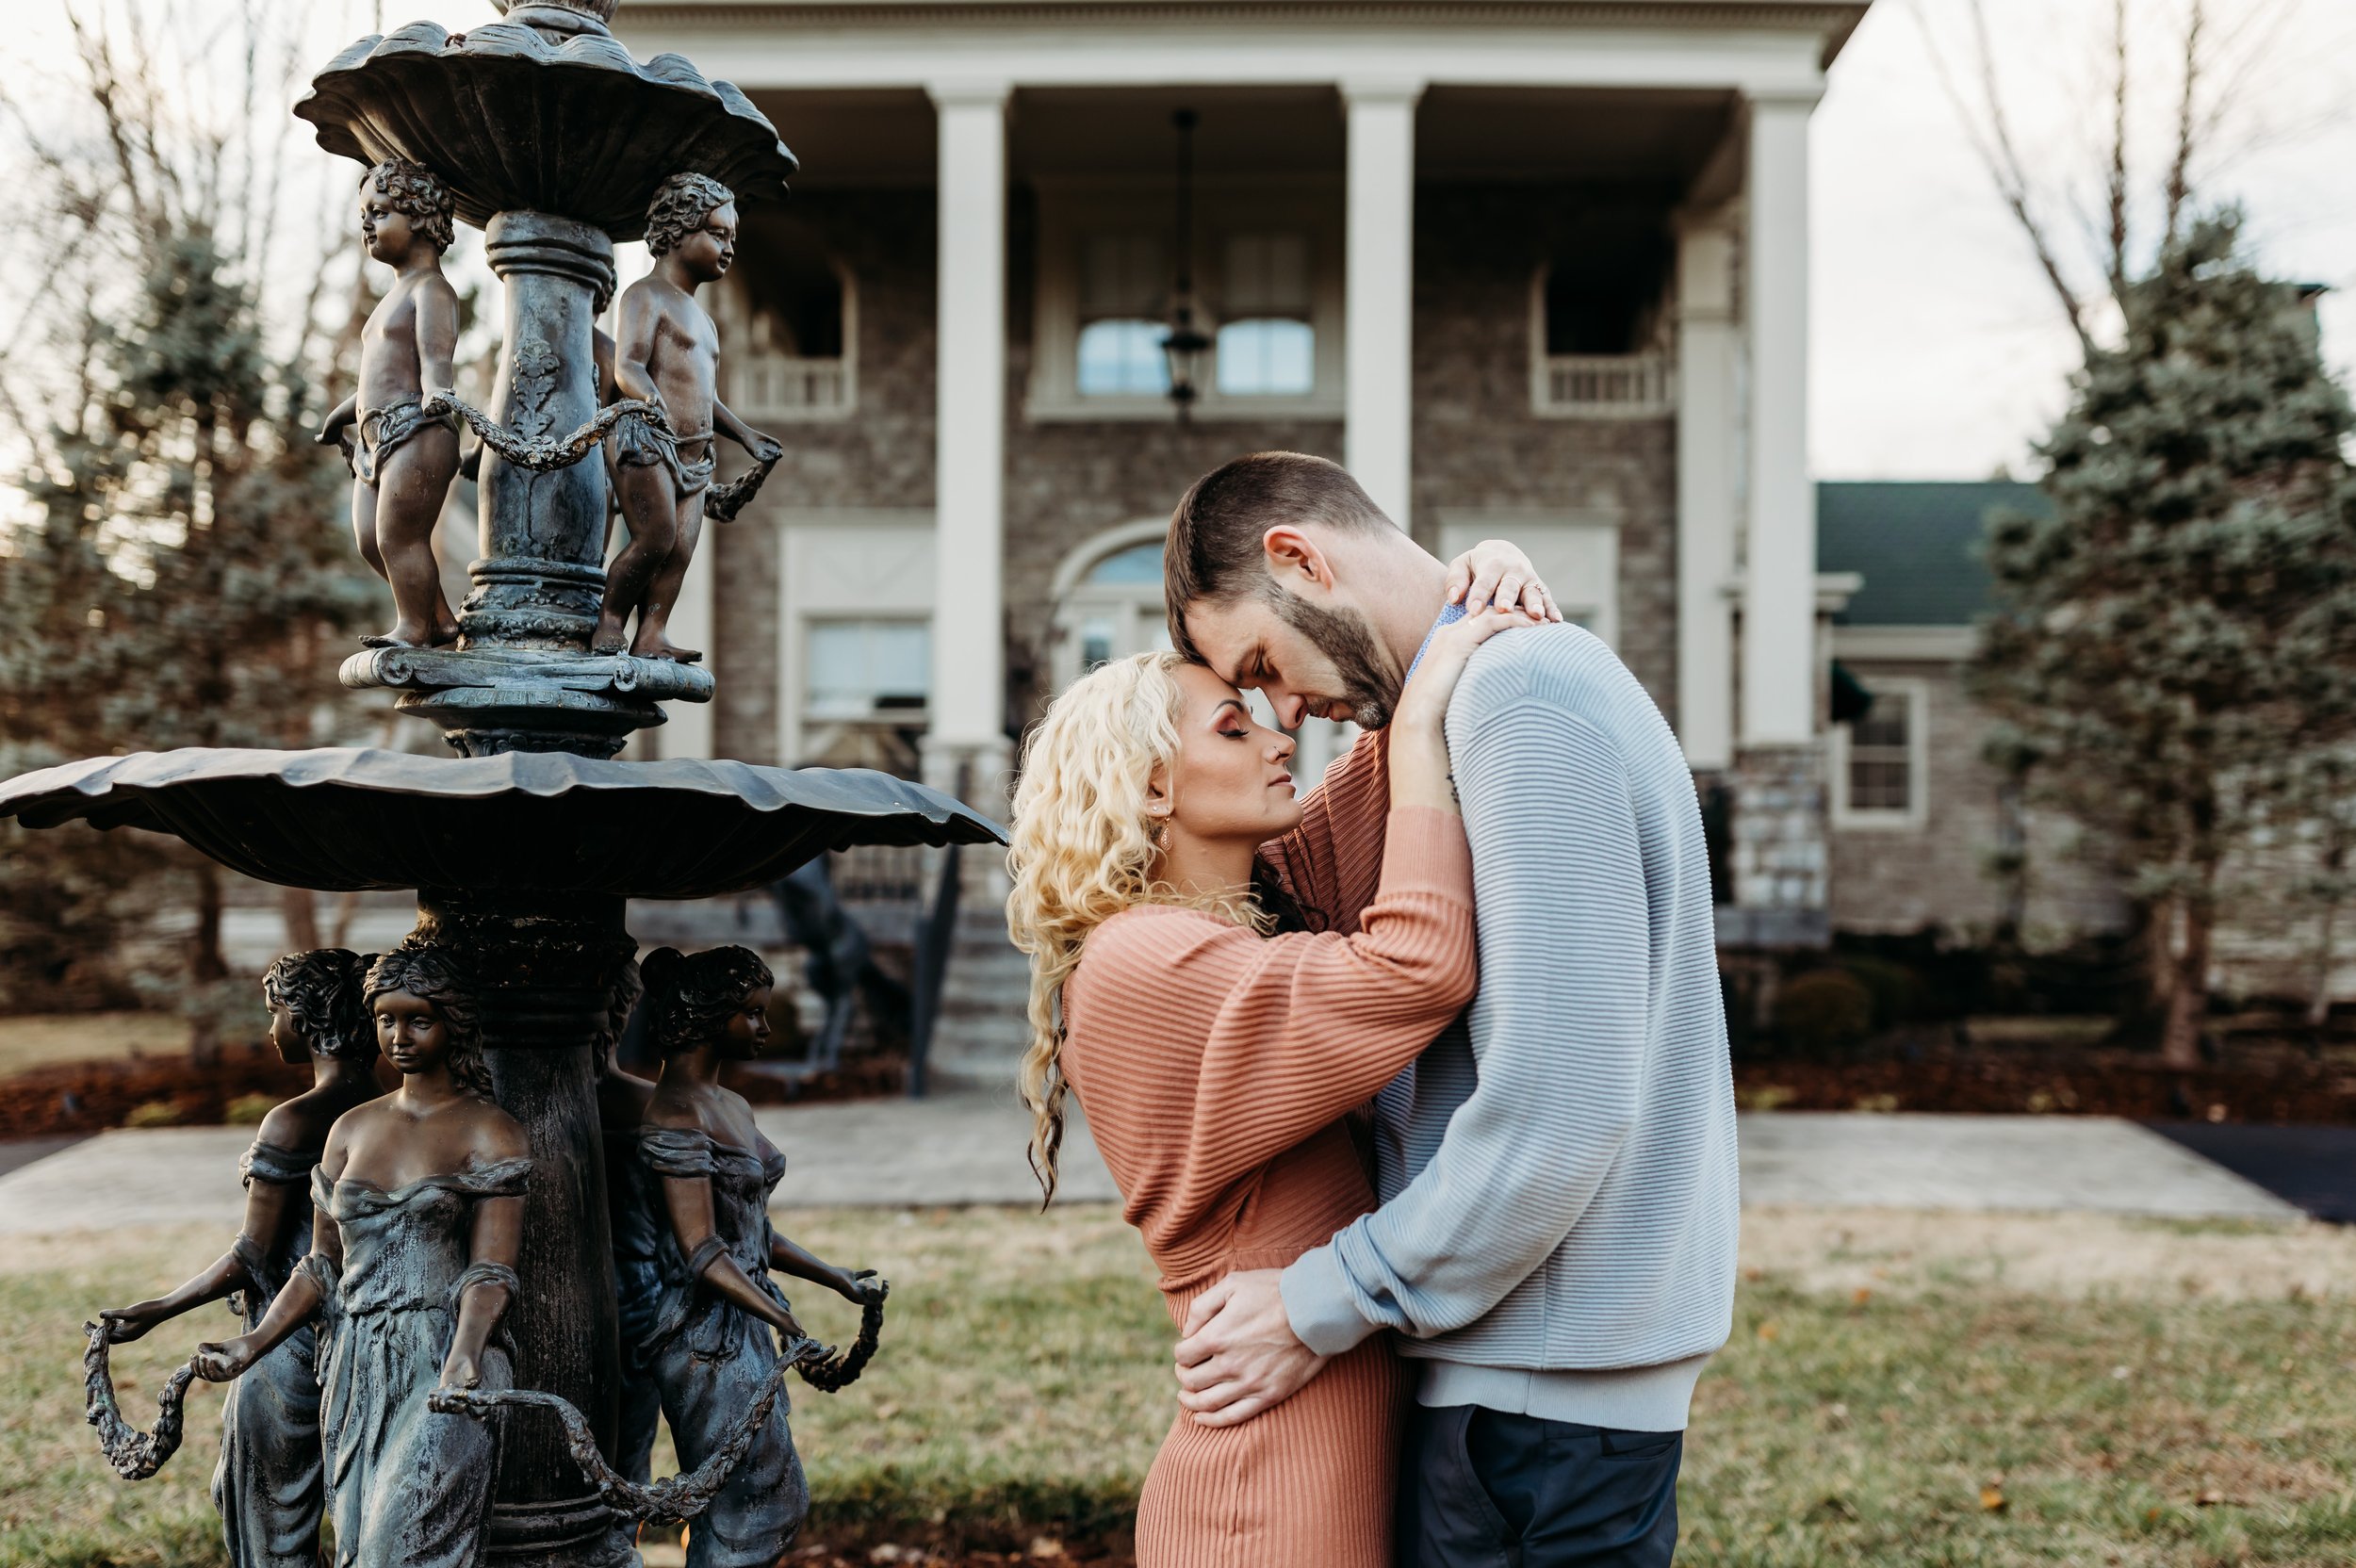  Engagement session at cpuples' home and property. Louisville, Kwntucky engagement photographer. 